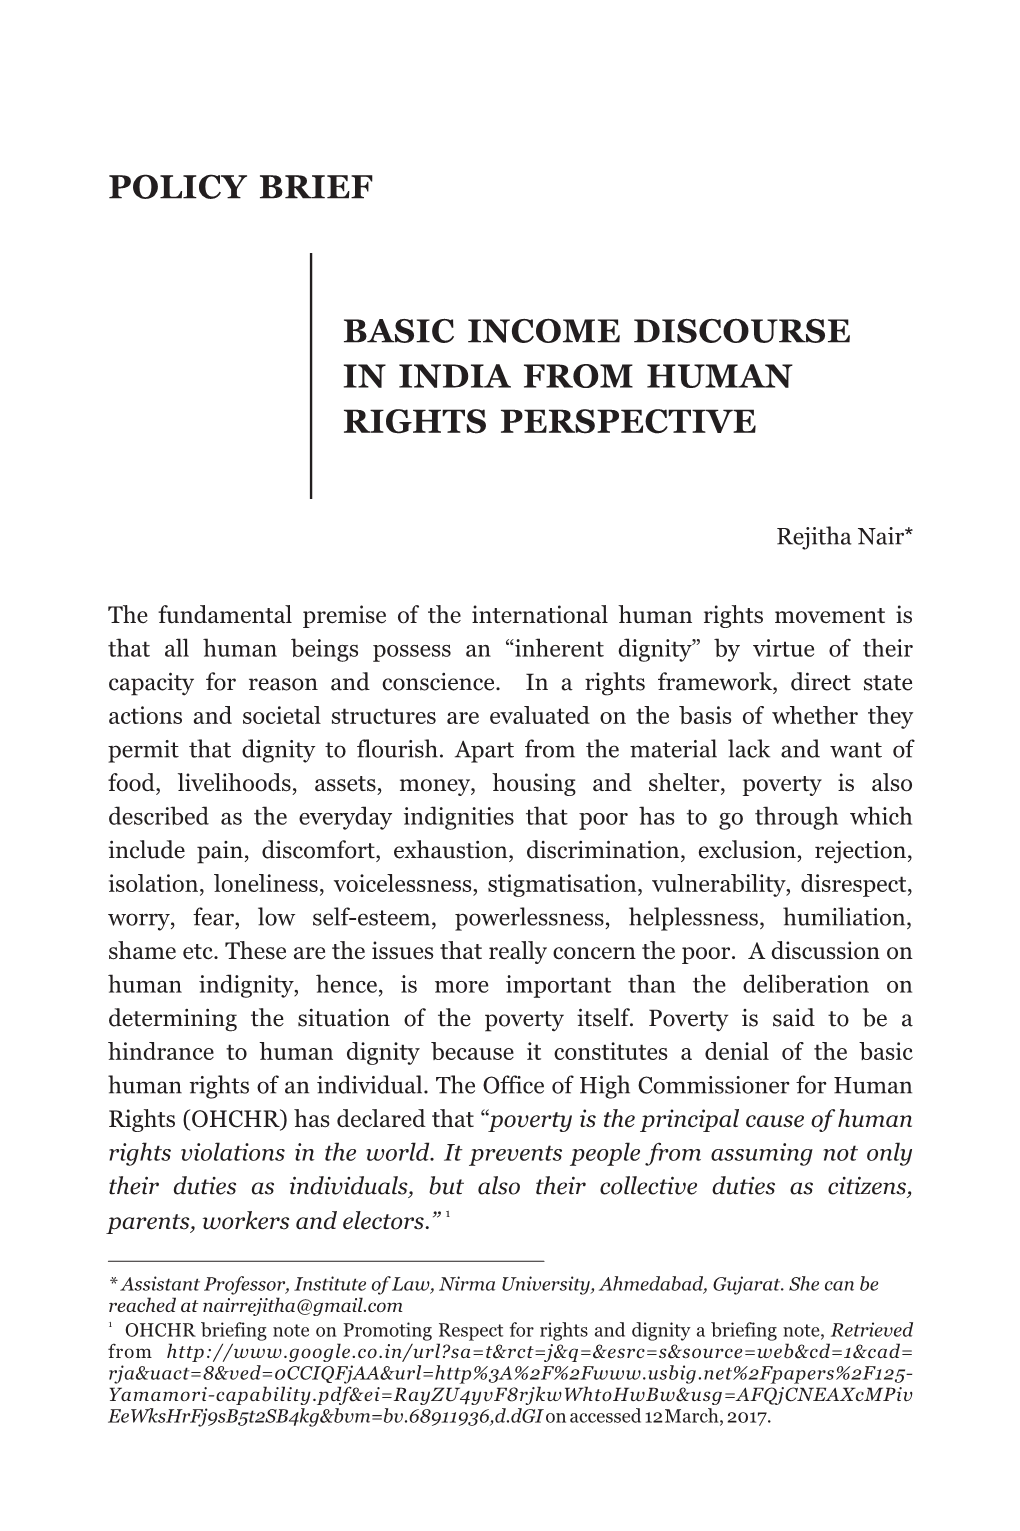 Basic Income Discourse in India from Human Rights Perspective Policy Brief